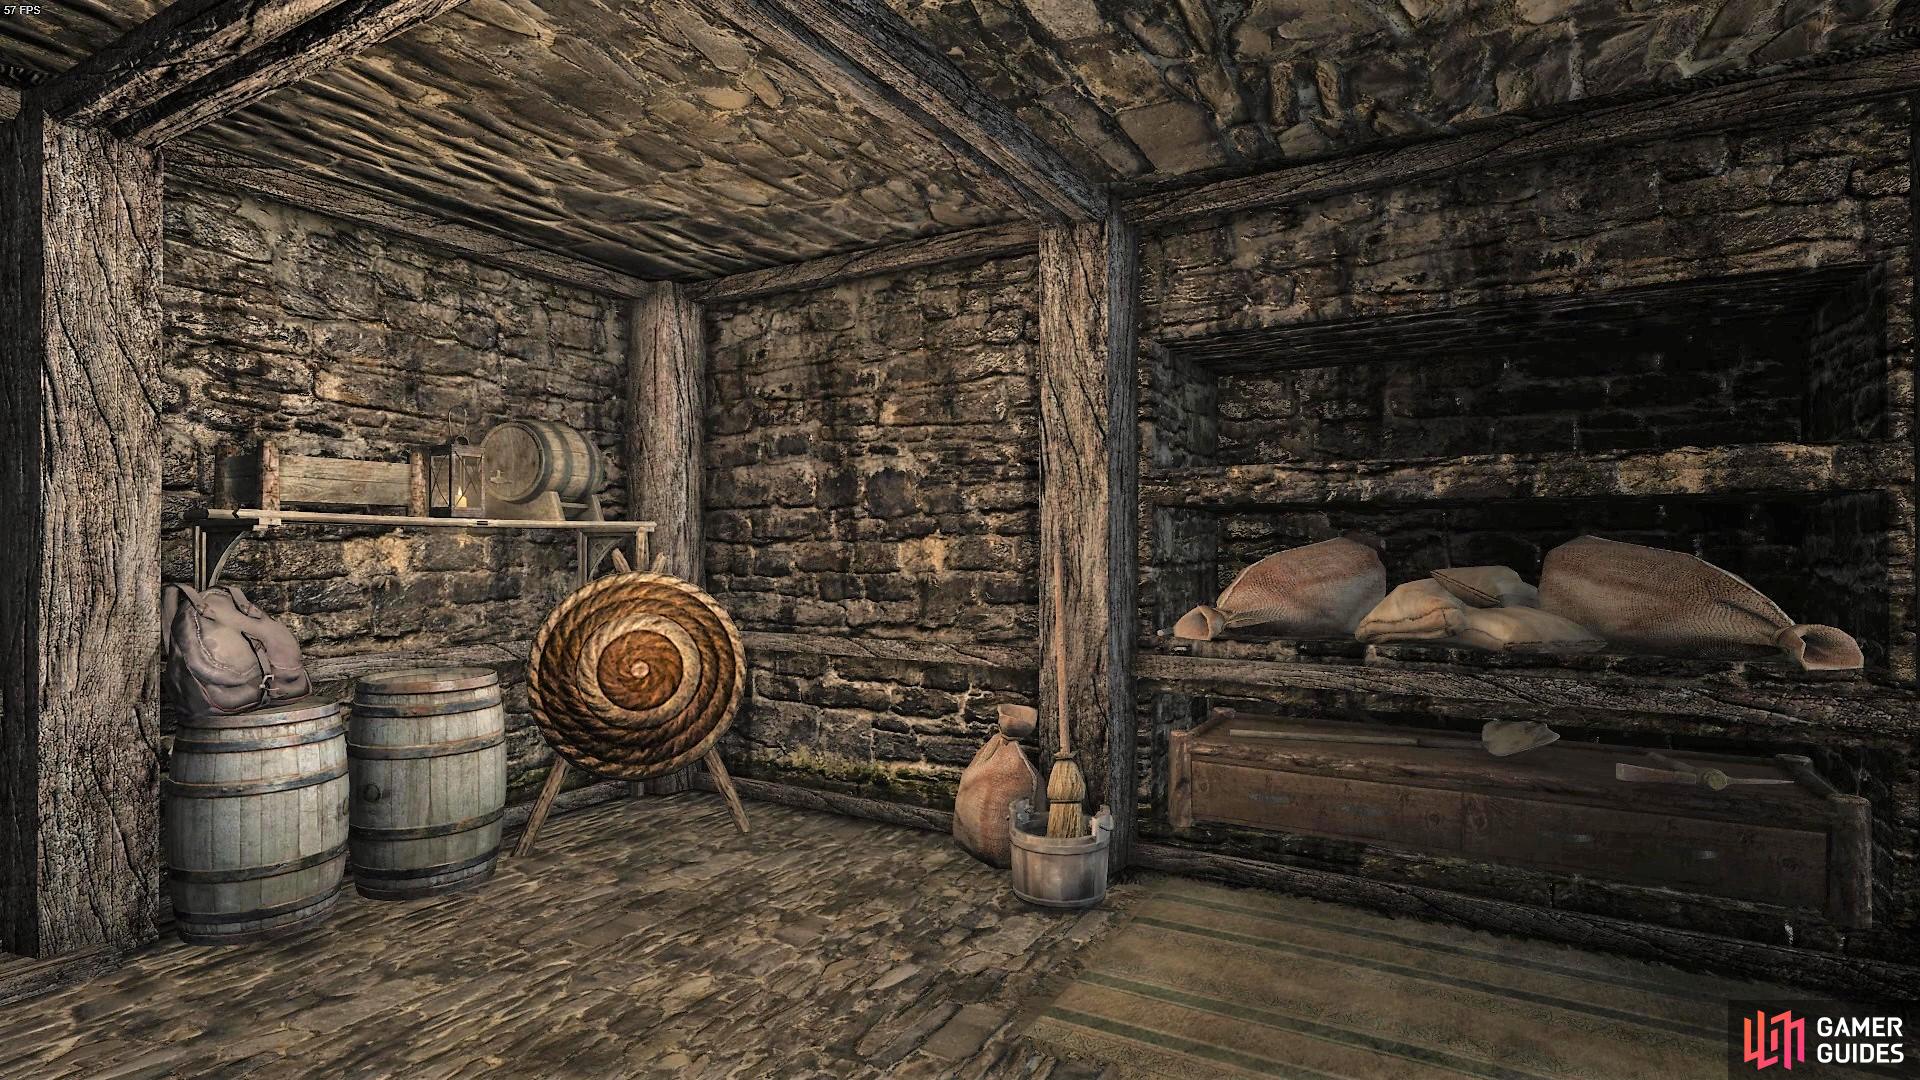 You could even practice your archery in the cellar (won't skill build though unfortunately).